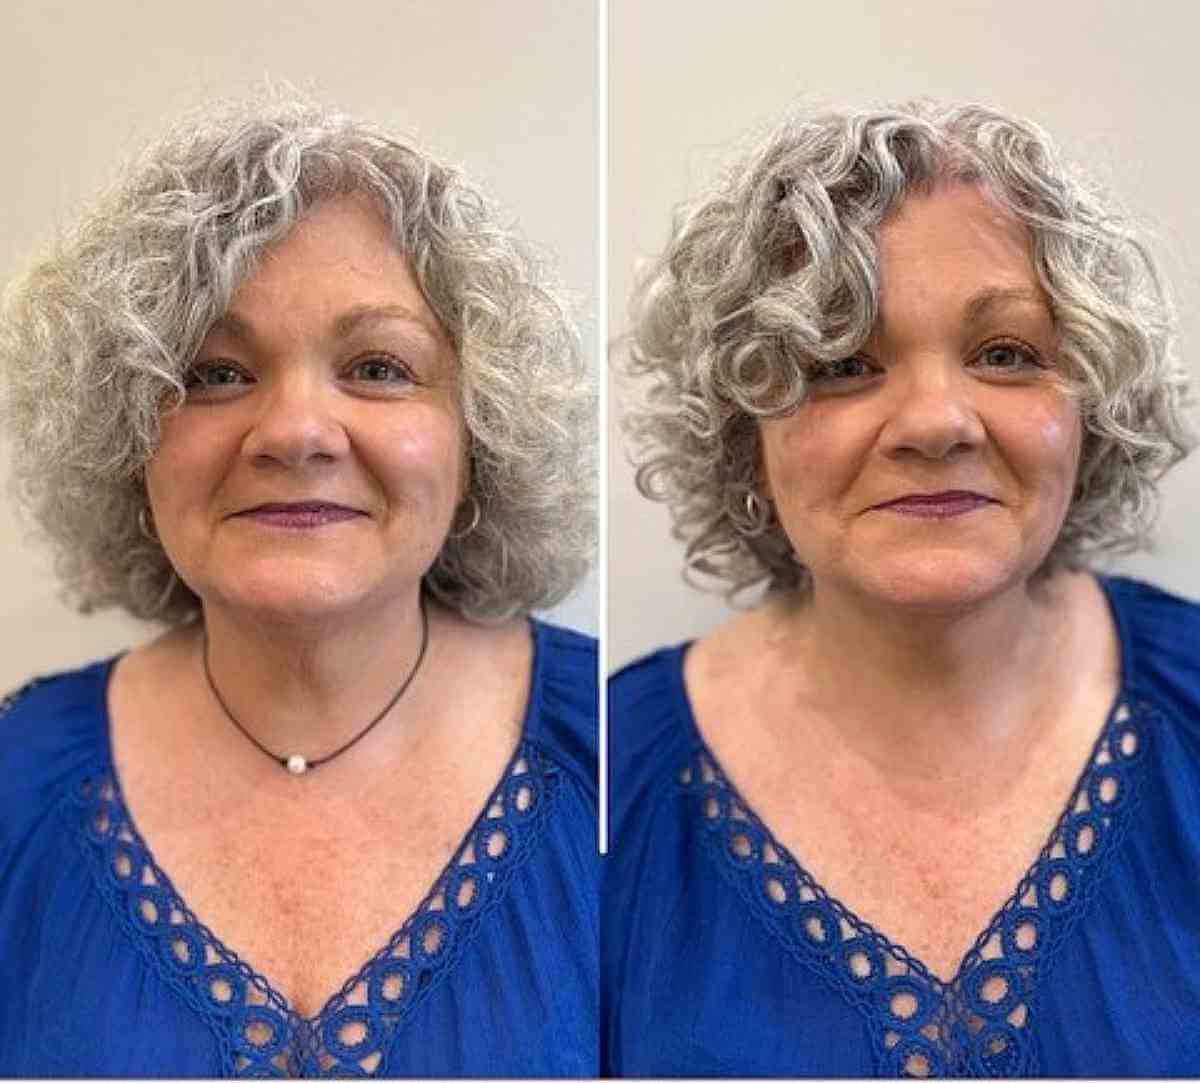 chin length hairstyle with curls for older women over 60